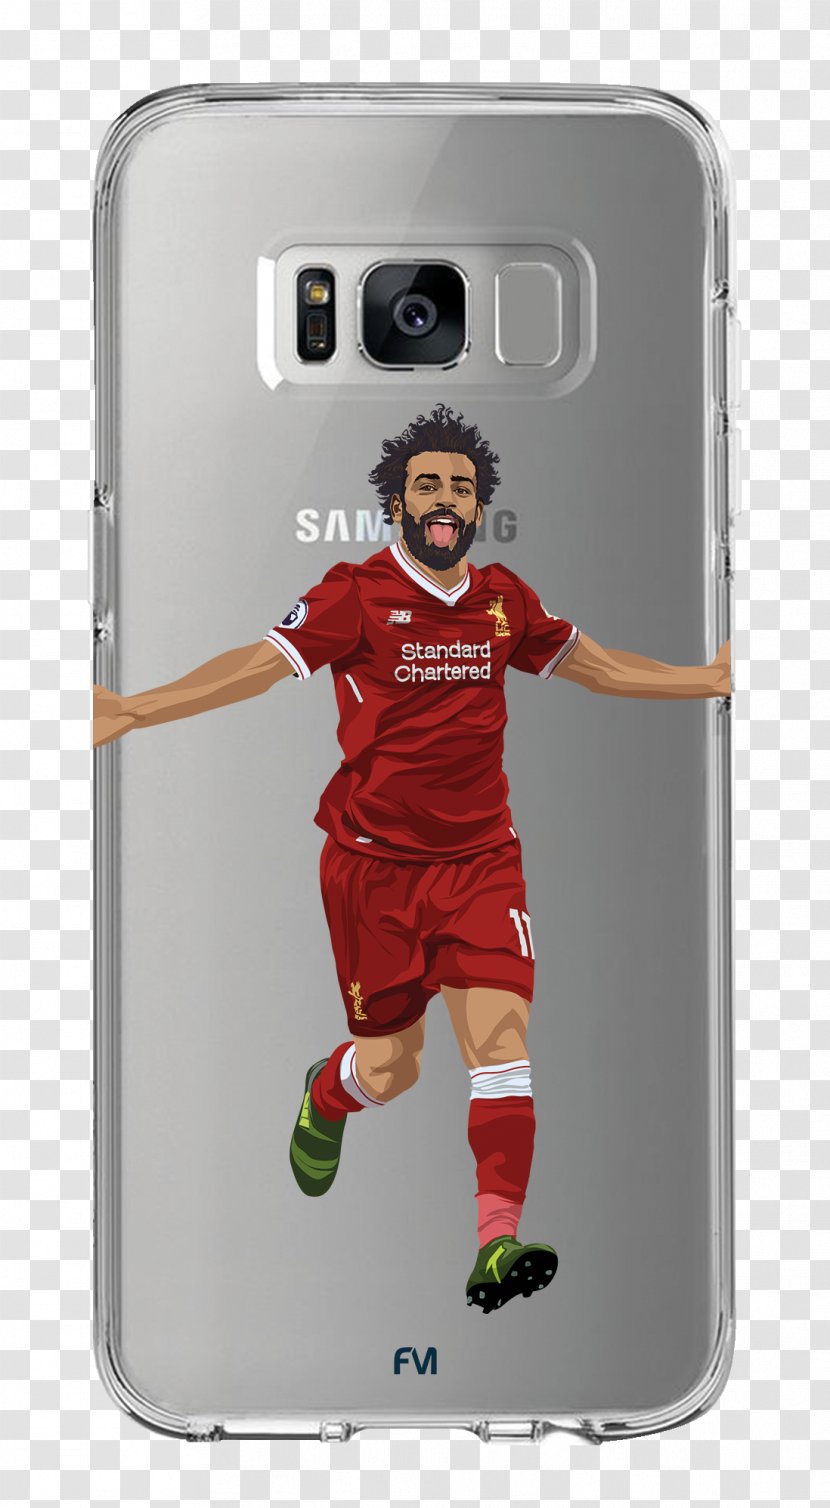 IPhone X Mobile Phone Accessories Samsung 2018 World Cup 6S - Iphone Transparent PNG